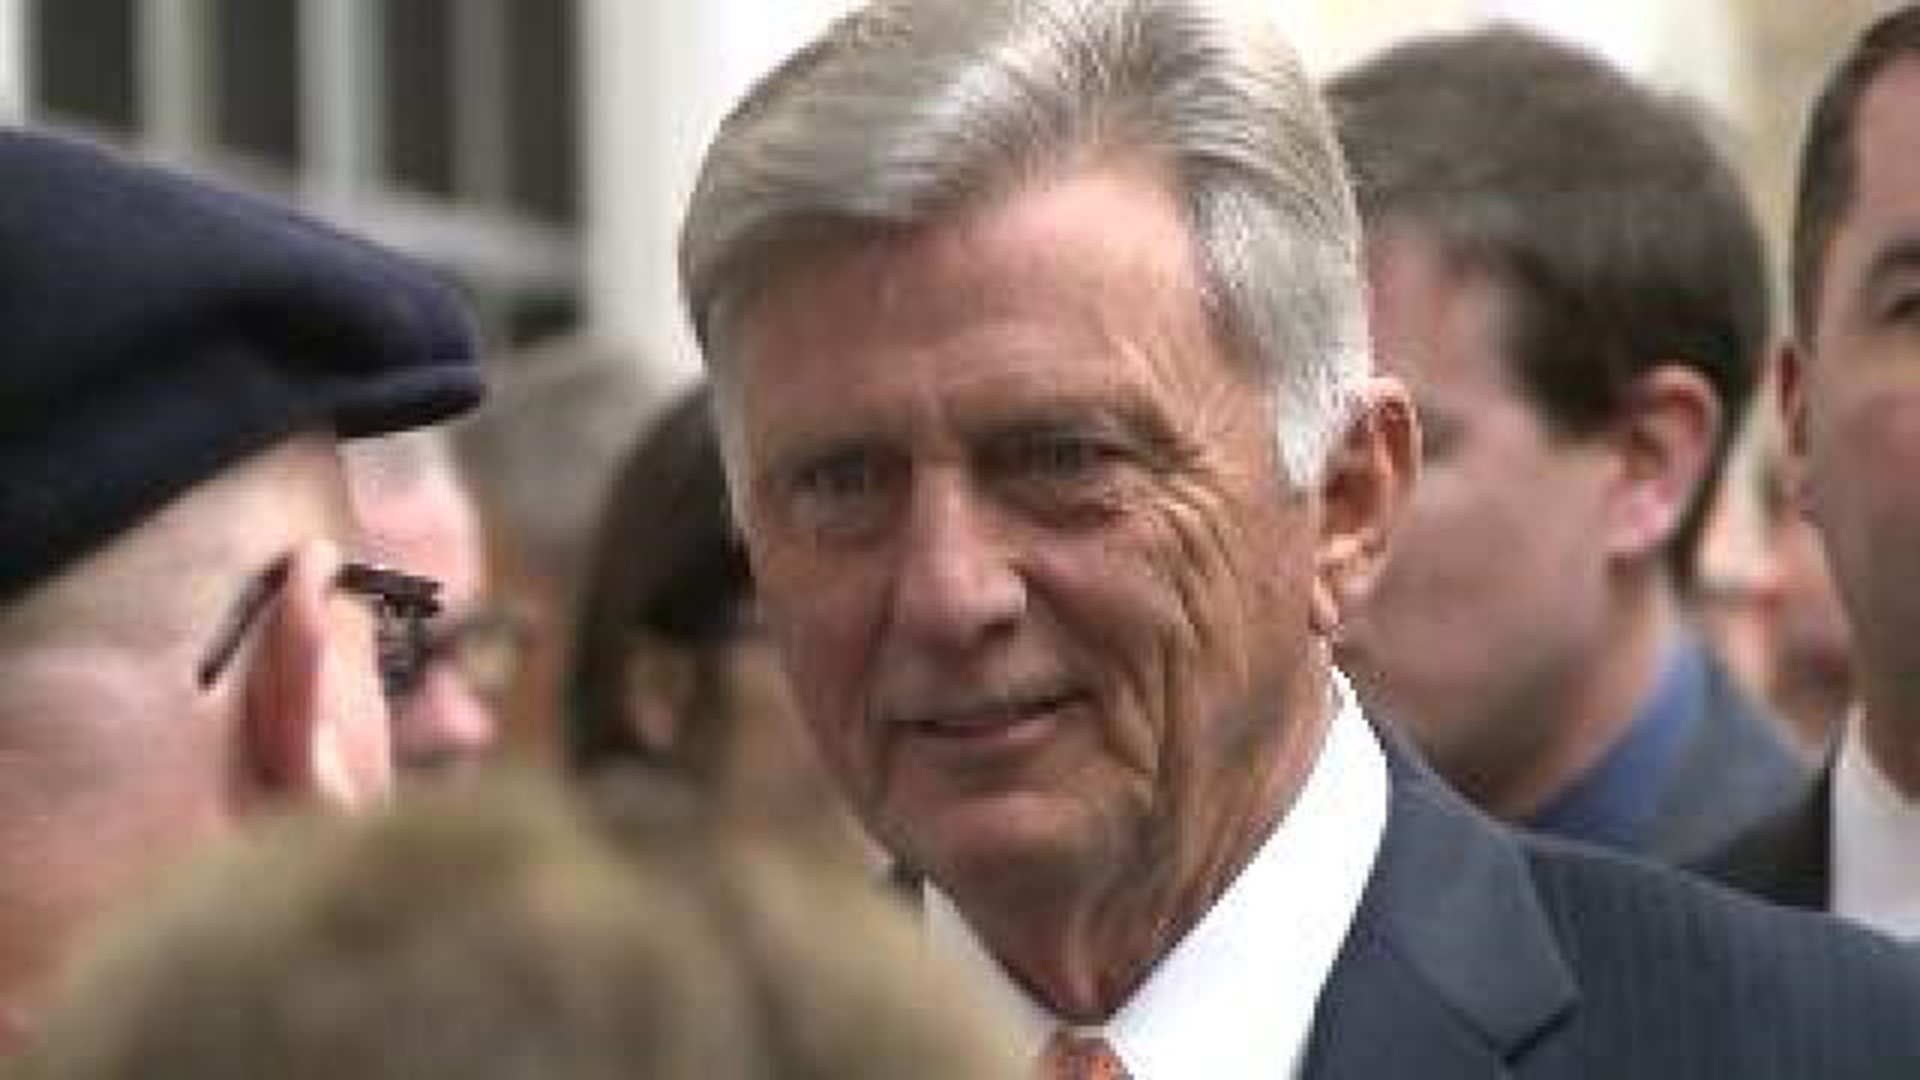 Beebe, Officials Meet to Discuss Umarex Expansion